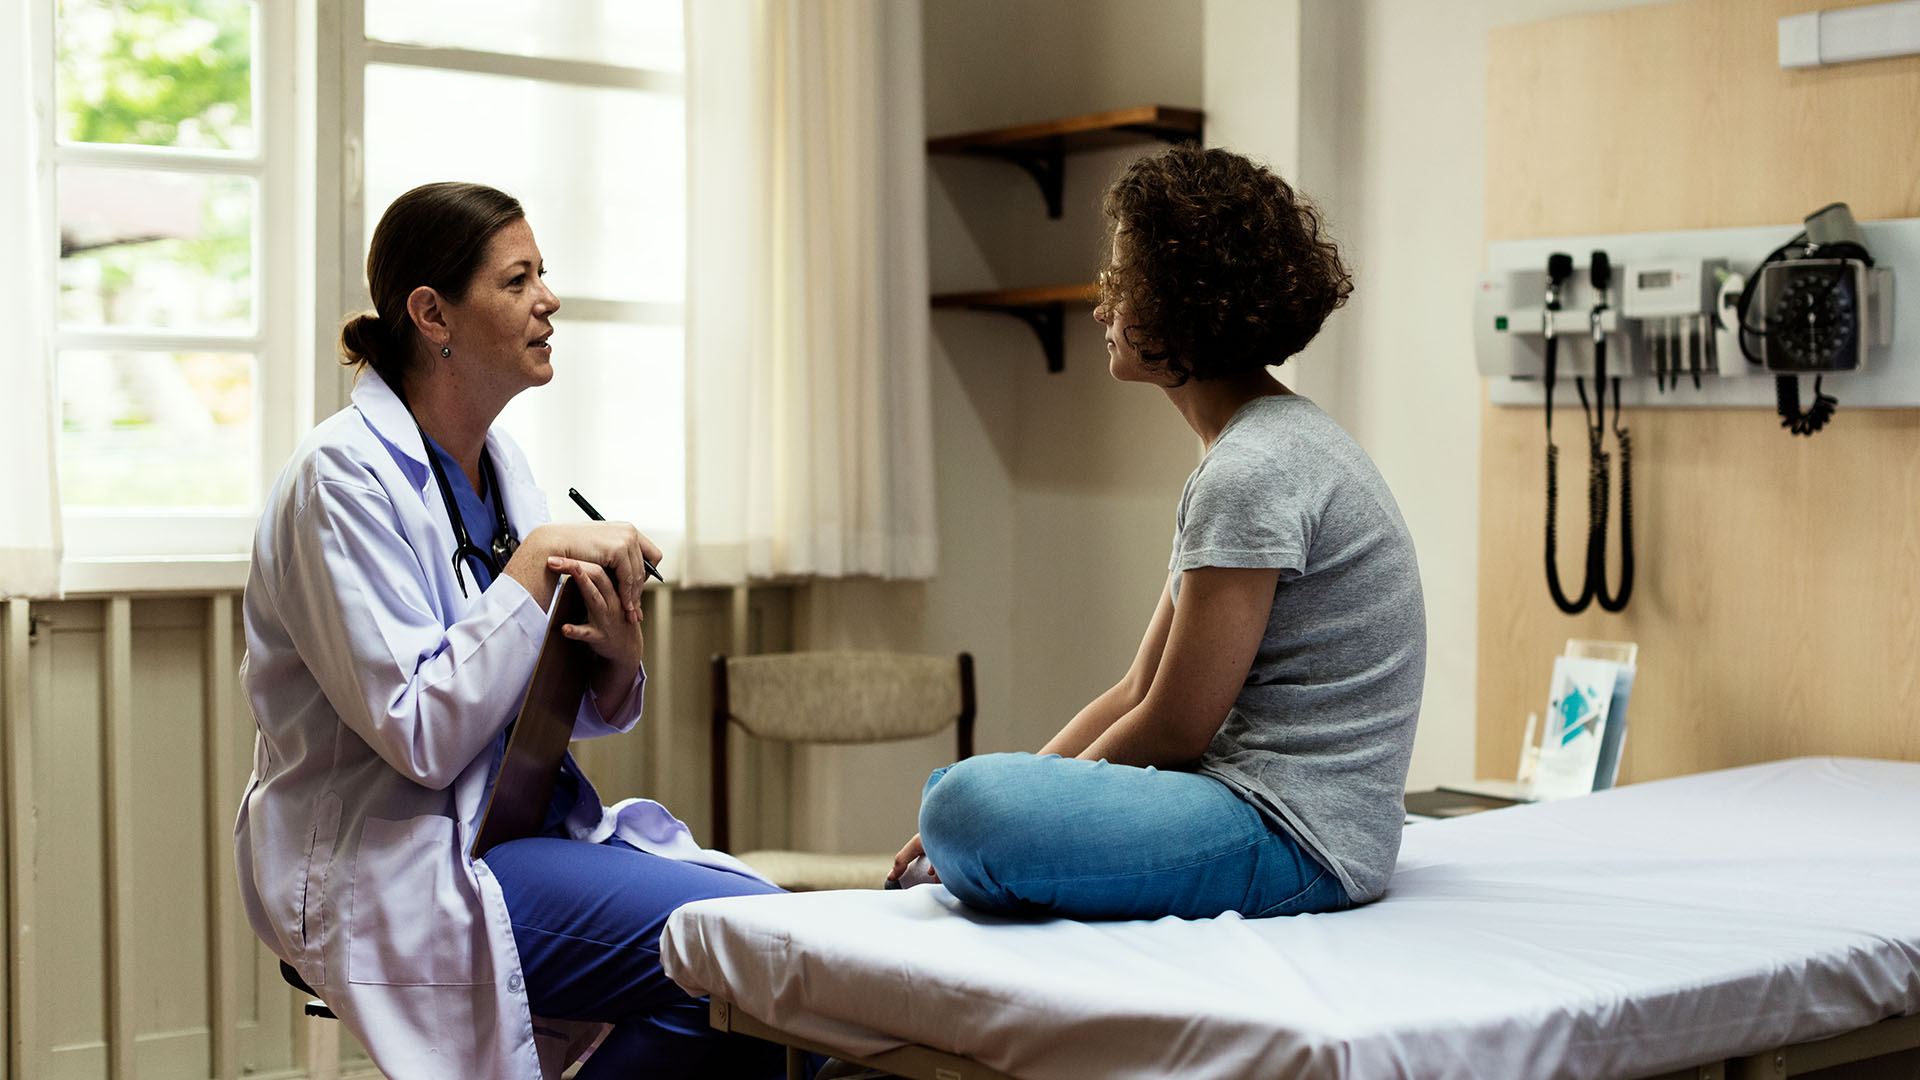 Doctor Speaking With Patient In A Hospital Regarding Injury Or Illness.